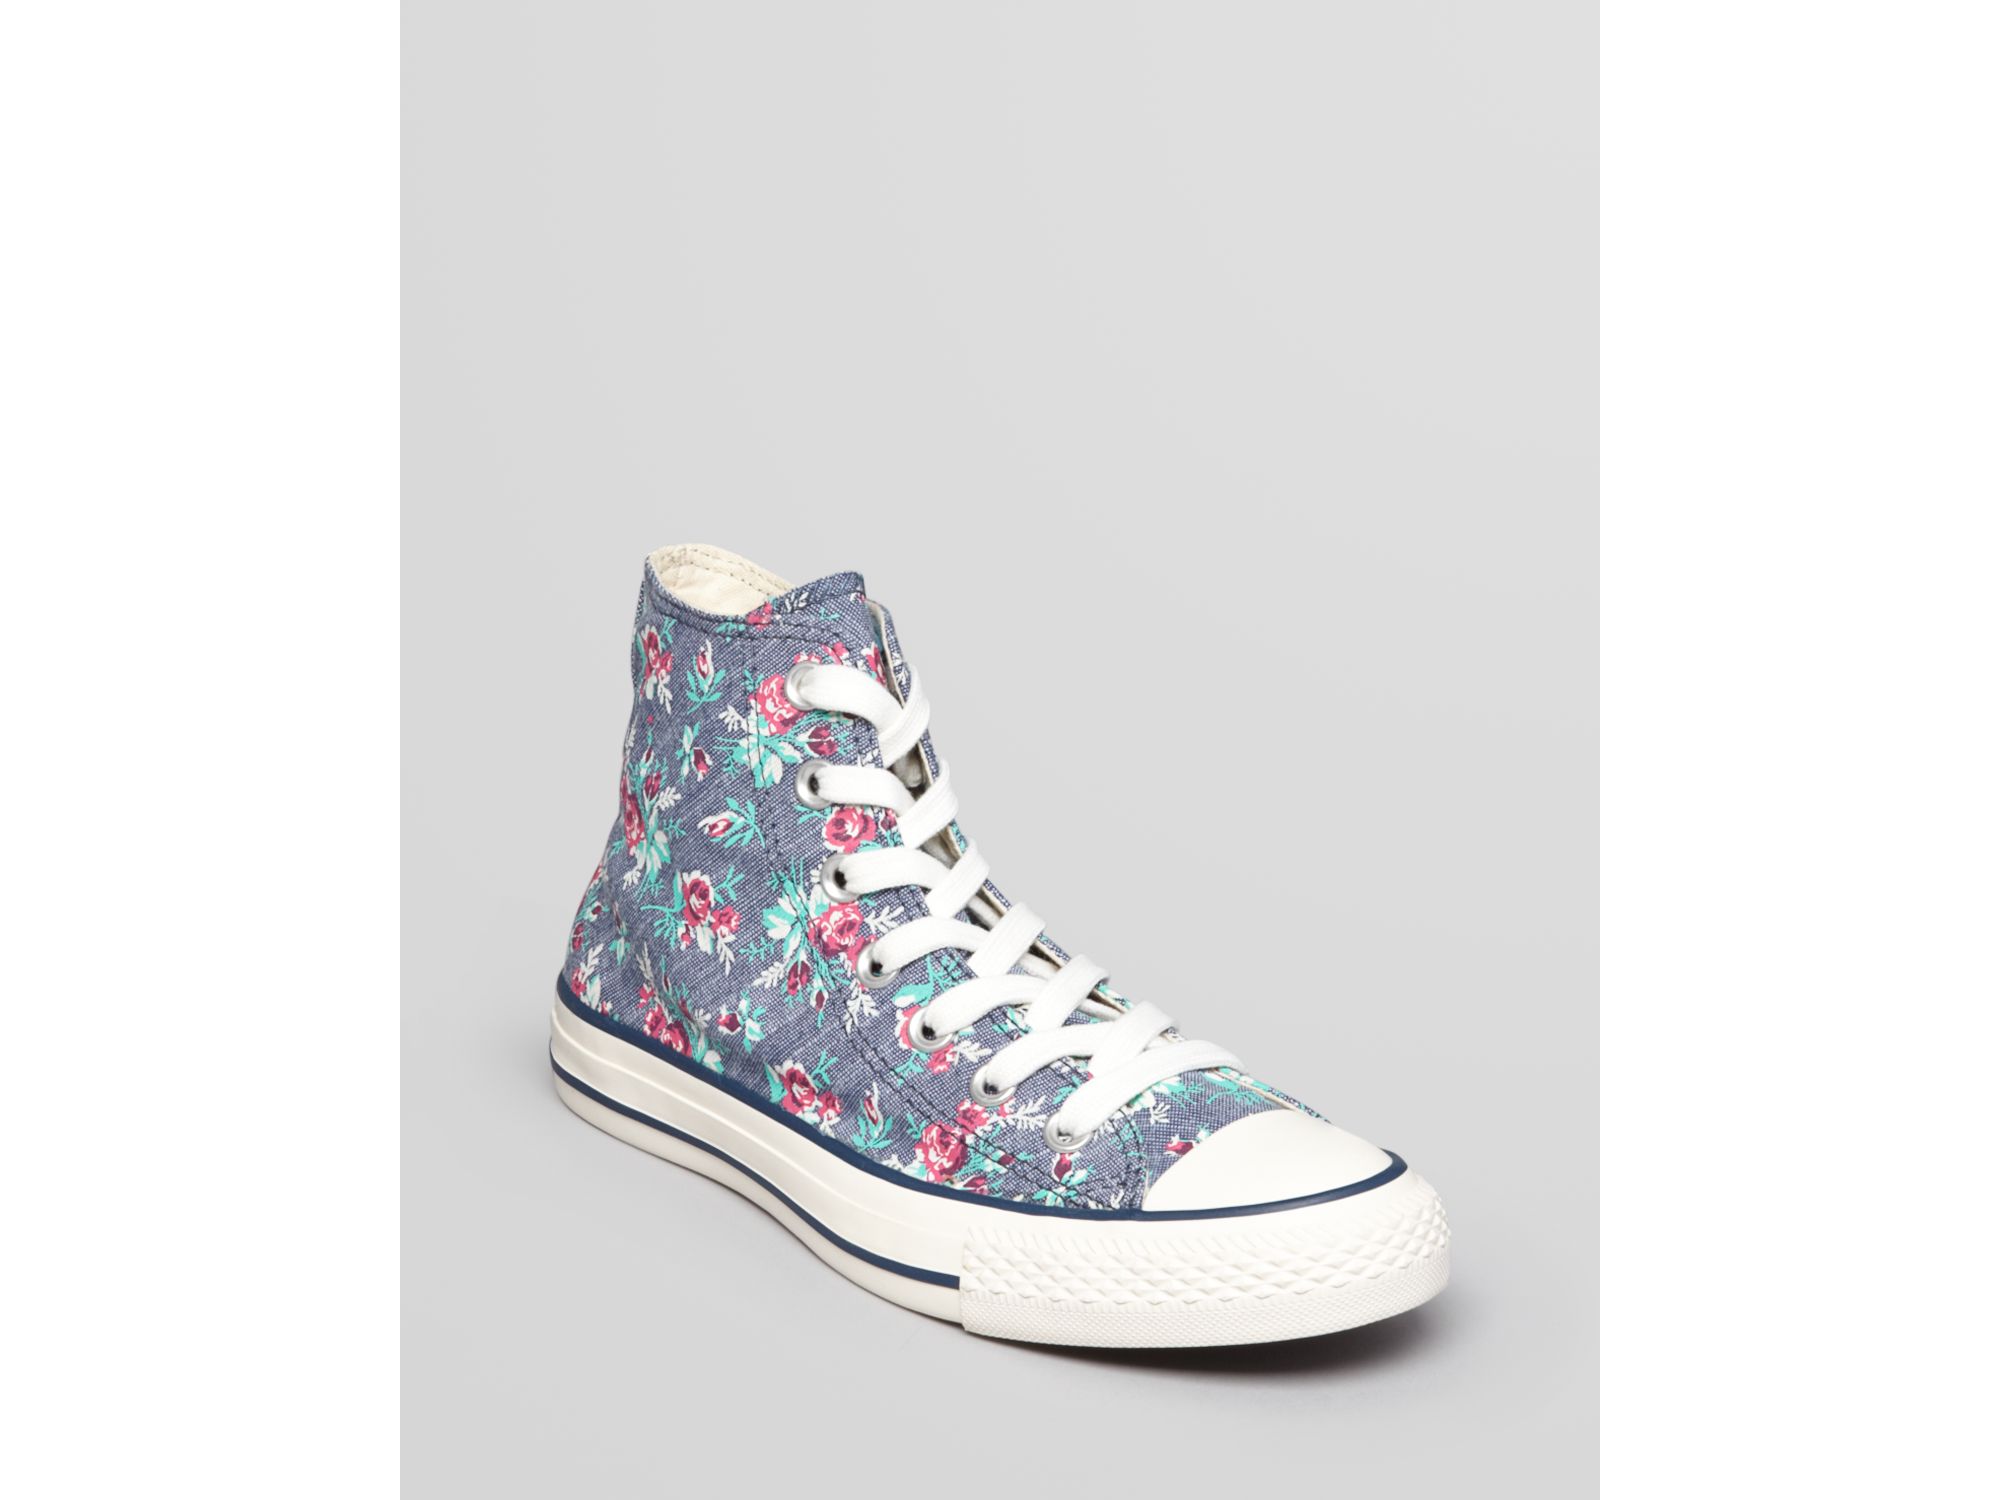 converse patterned shoes